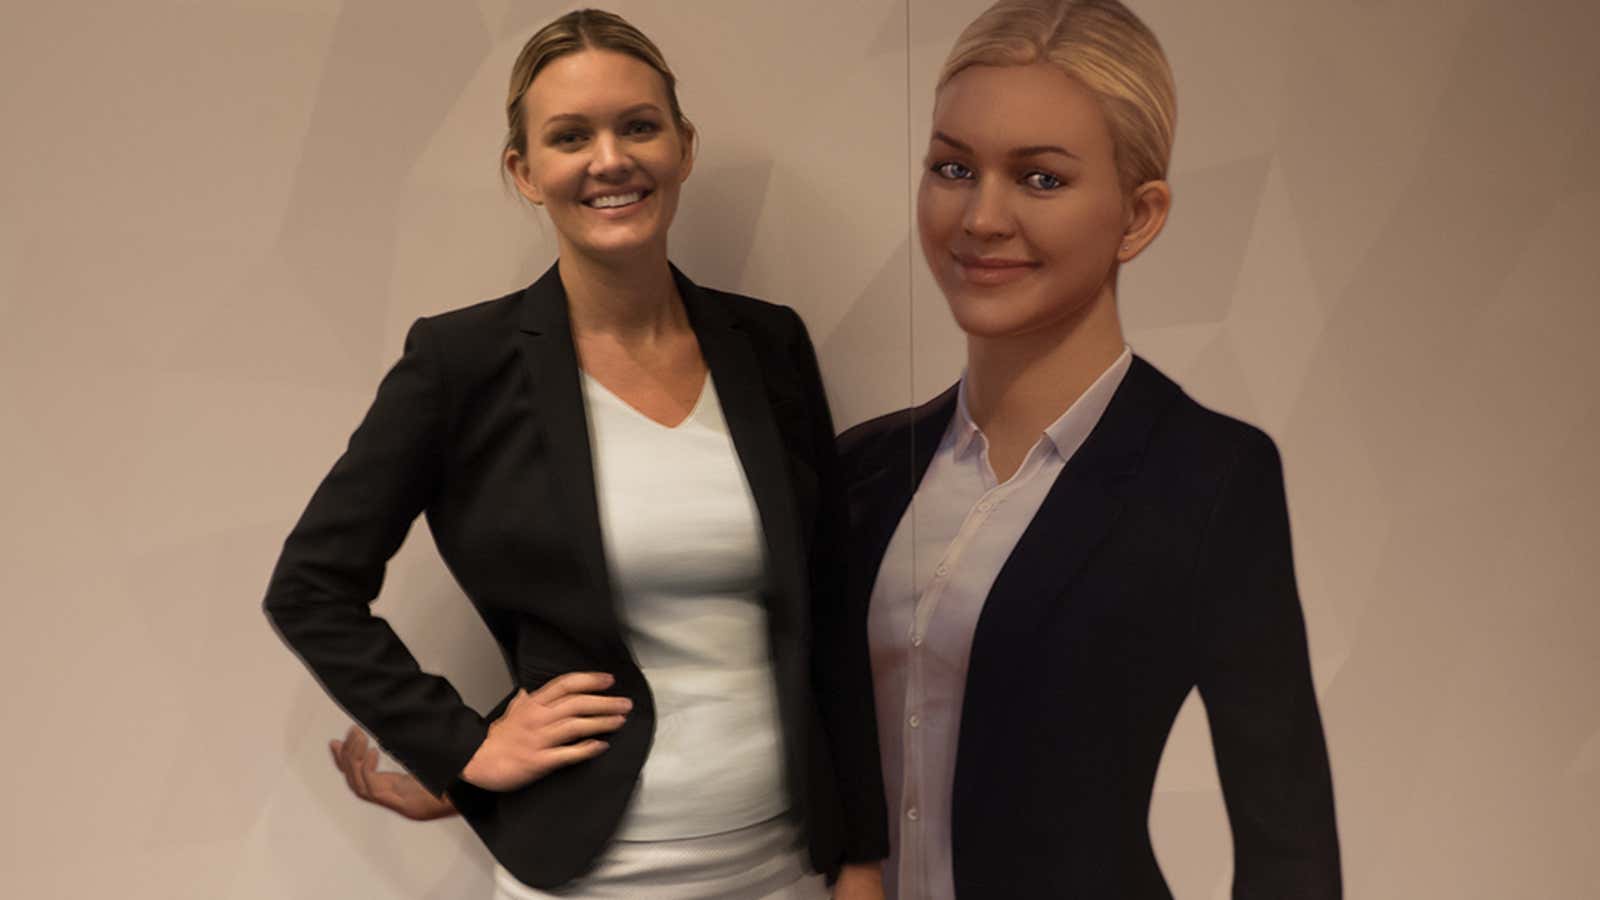 The avatar for AI technology Amelia (right) is based on Lauren Hayes (left).